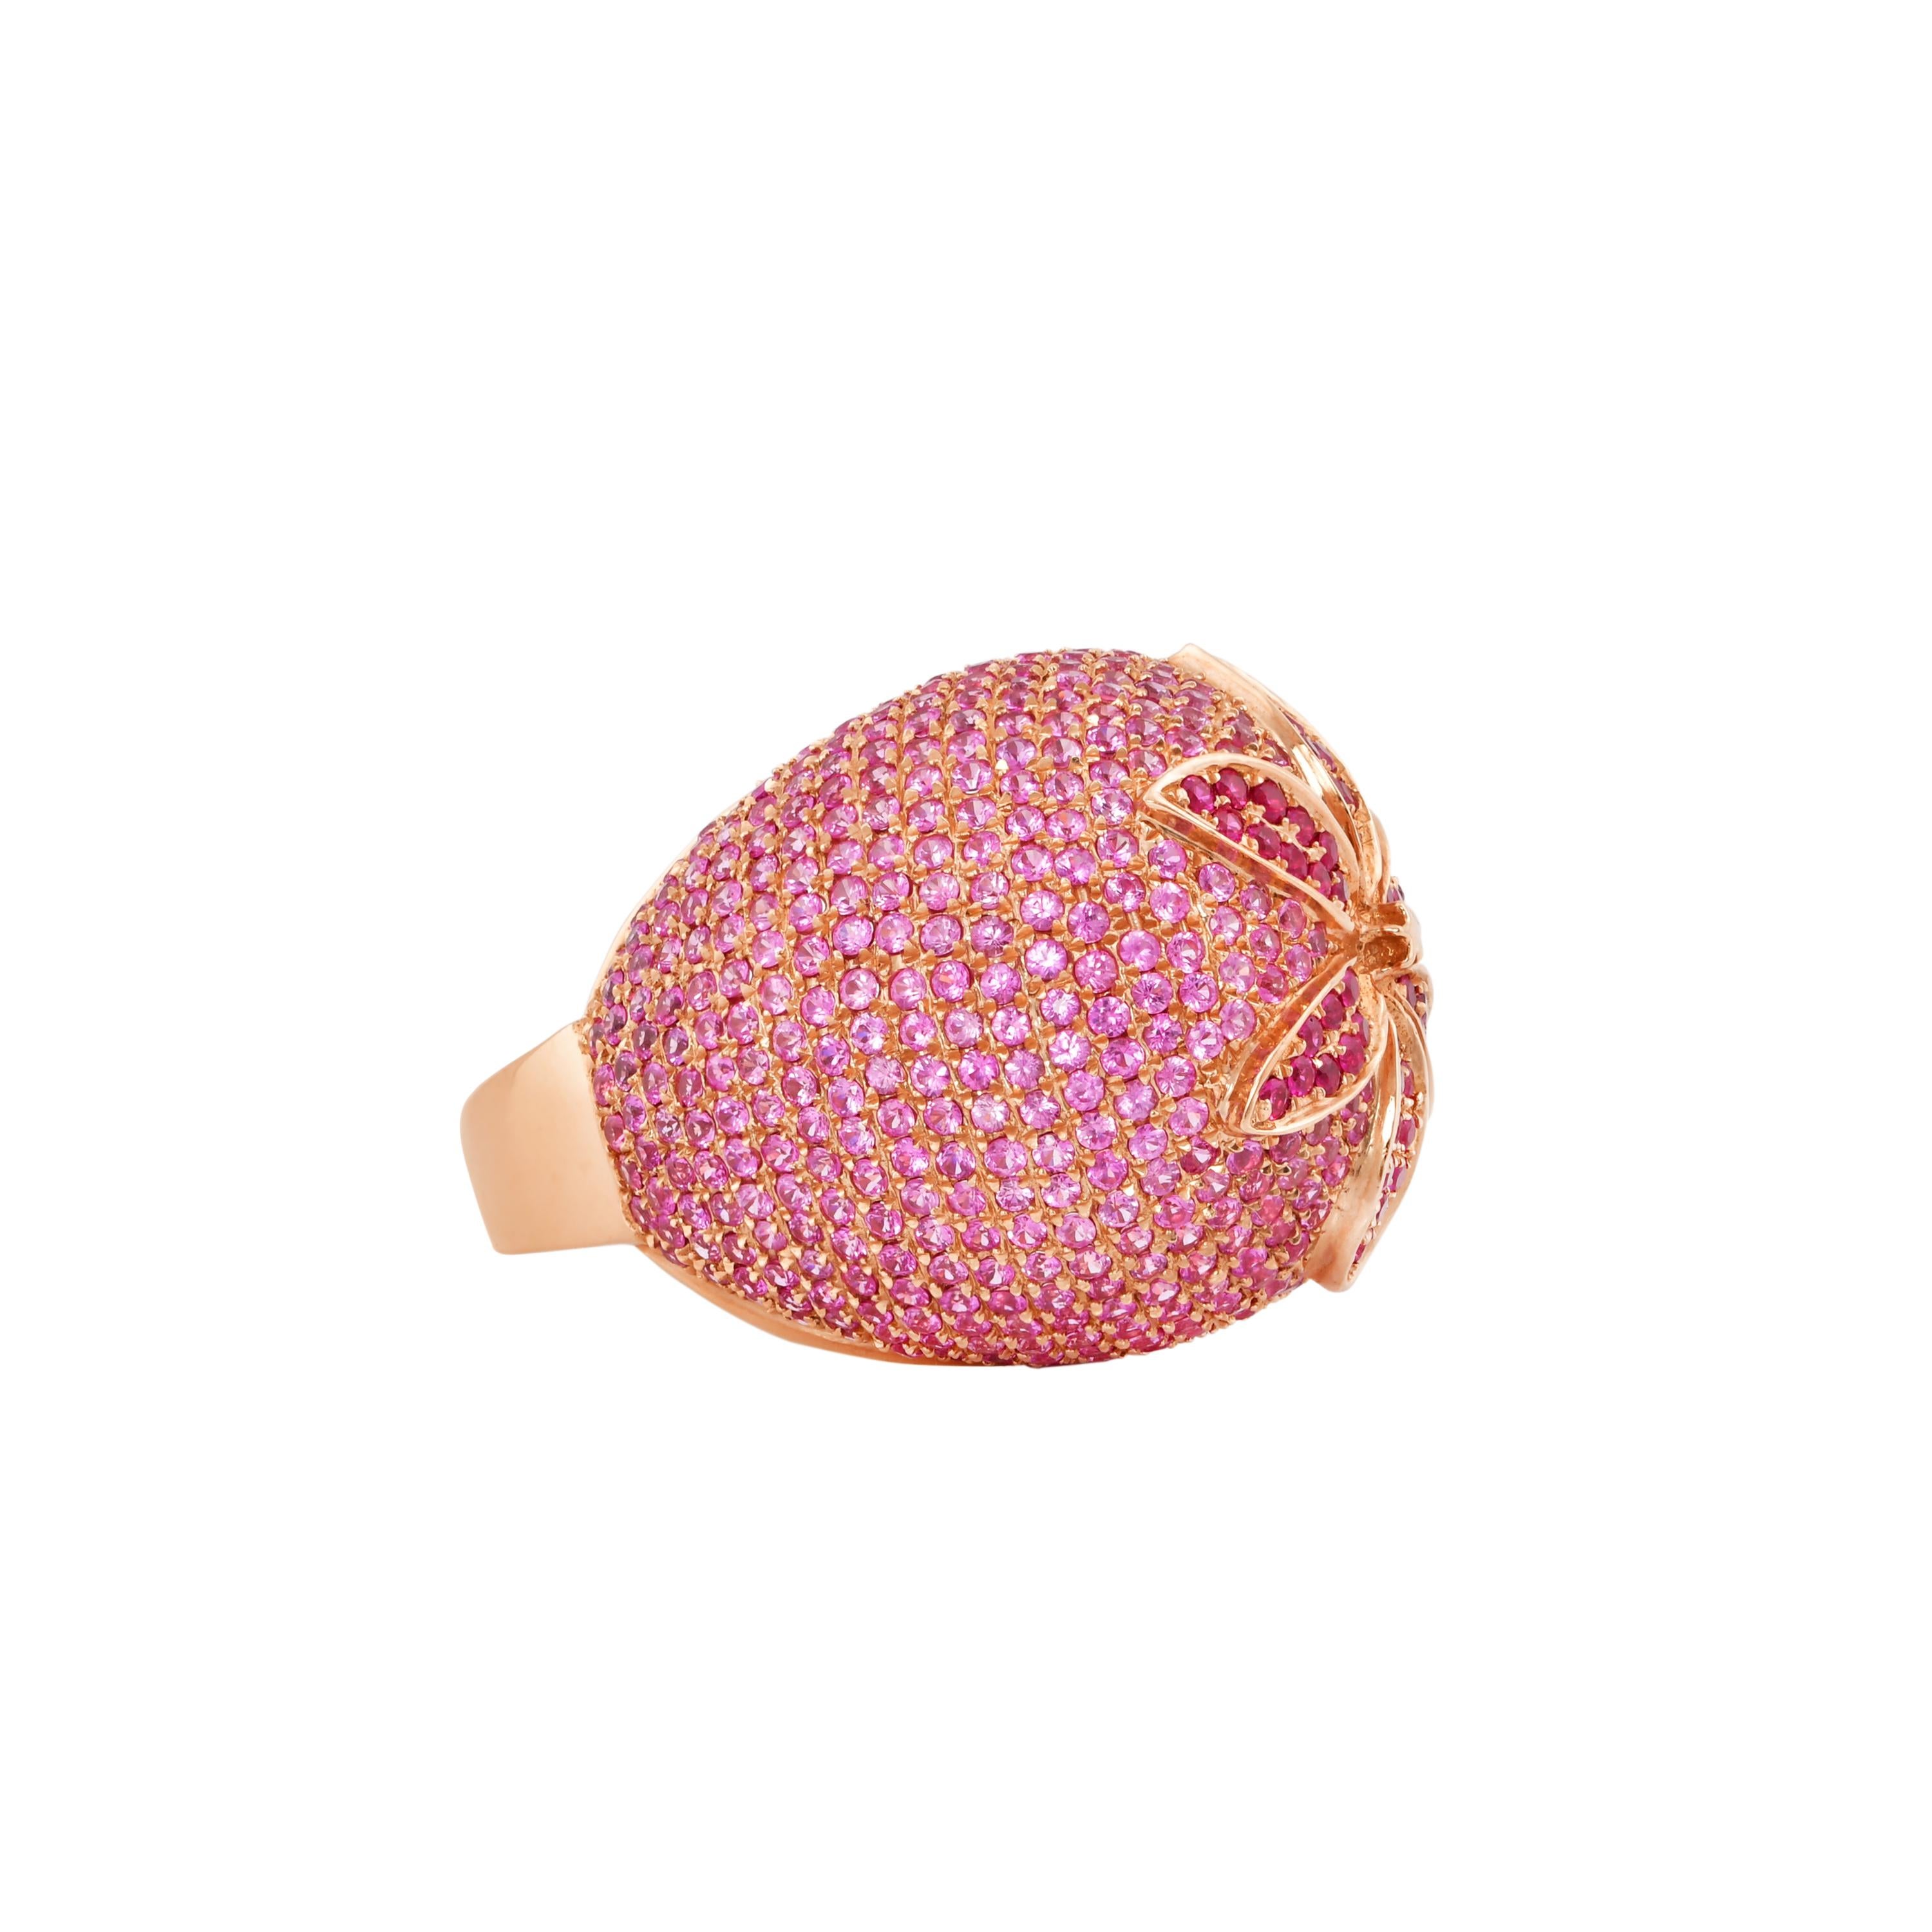 Contemporary Floral 5.2 Carat Ruby and Pink Sapphire Ring in 14 Karat Rose Gold For Sale